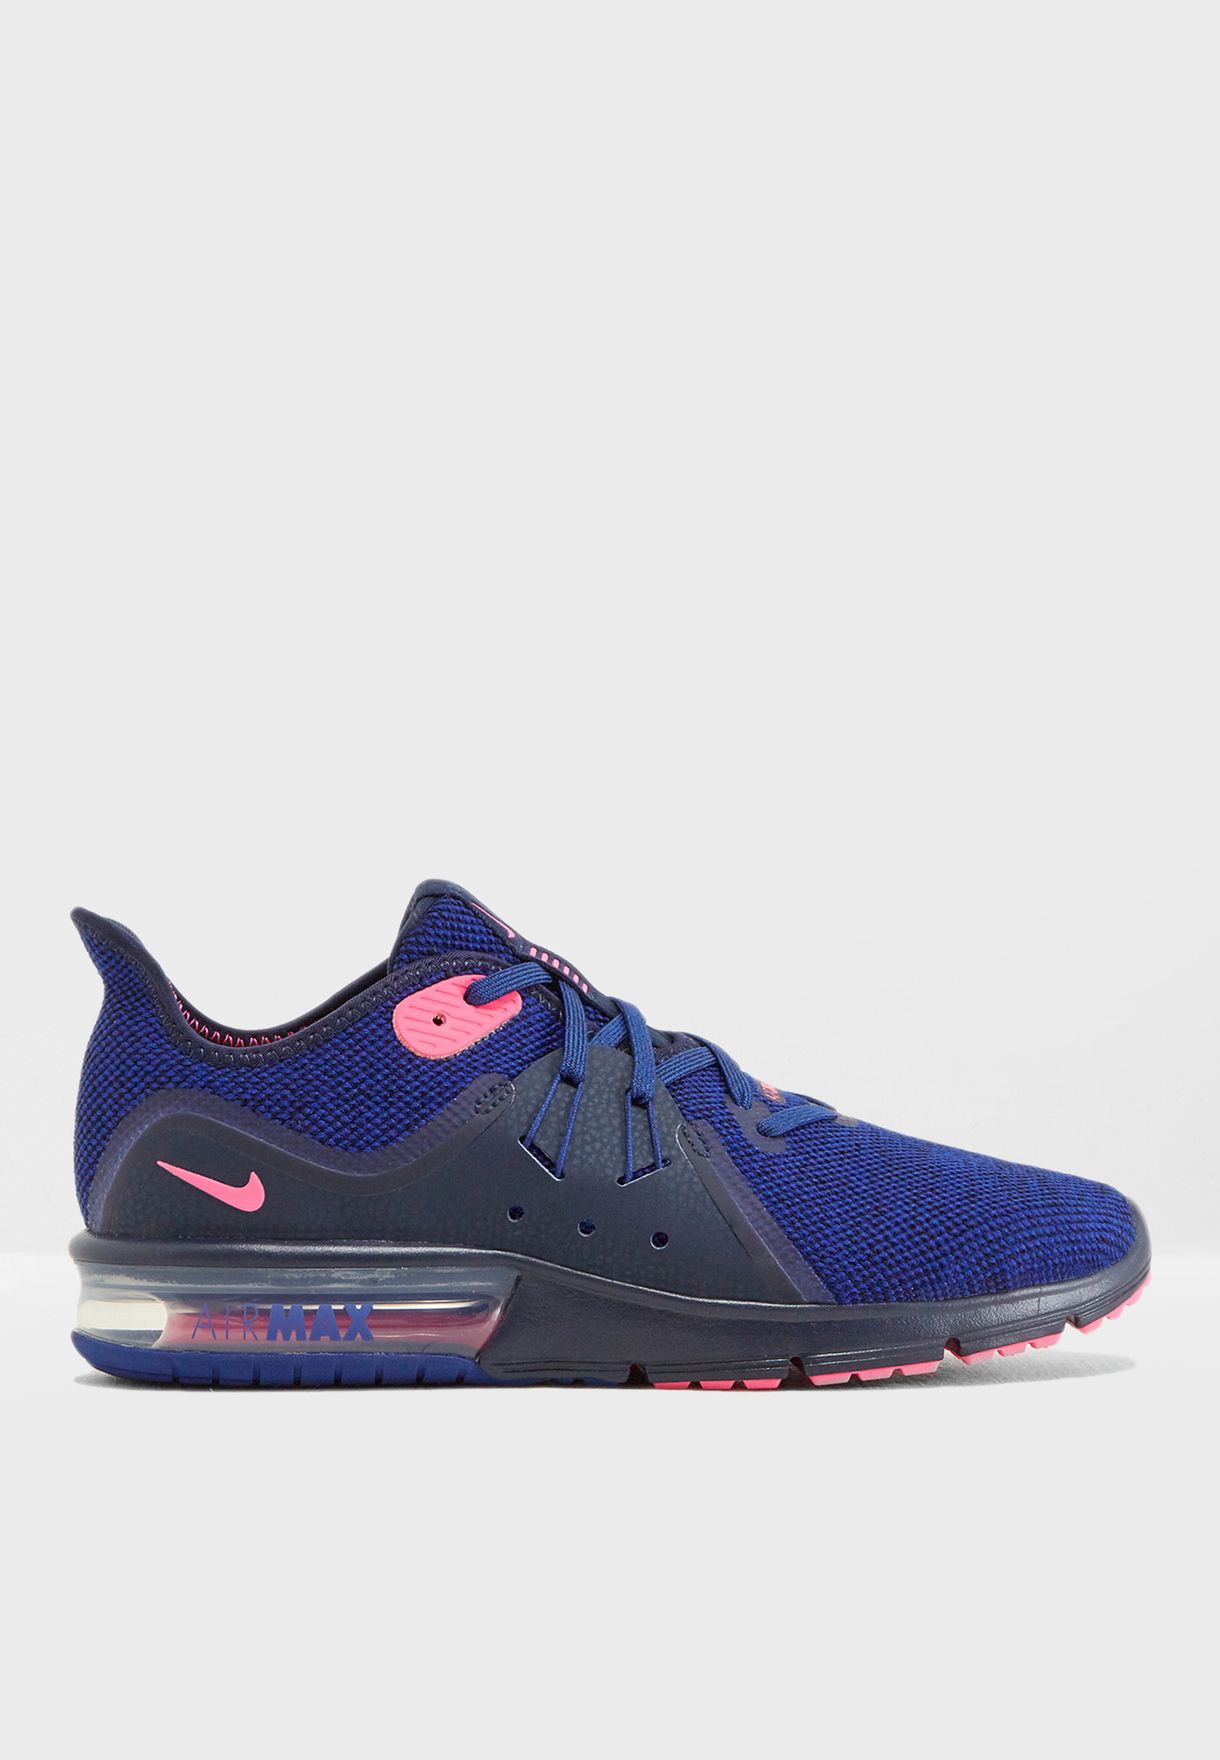 nike sequent 3 blue